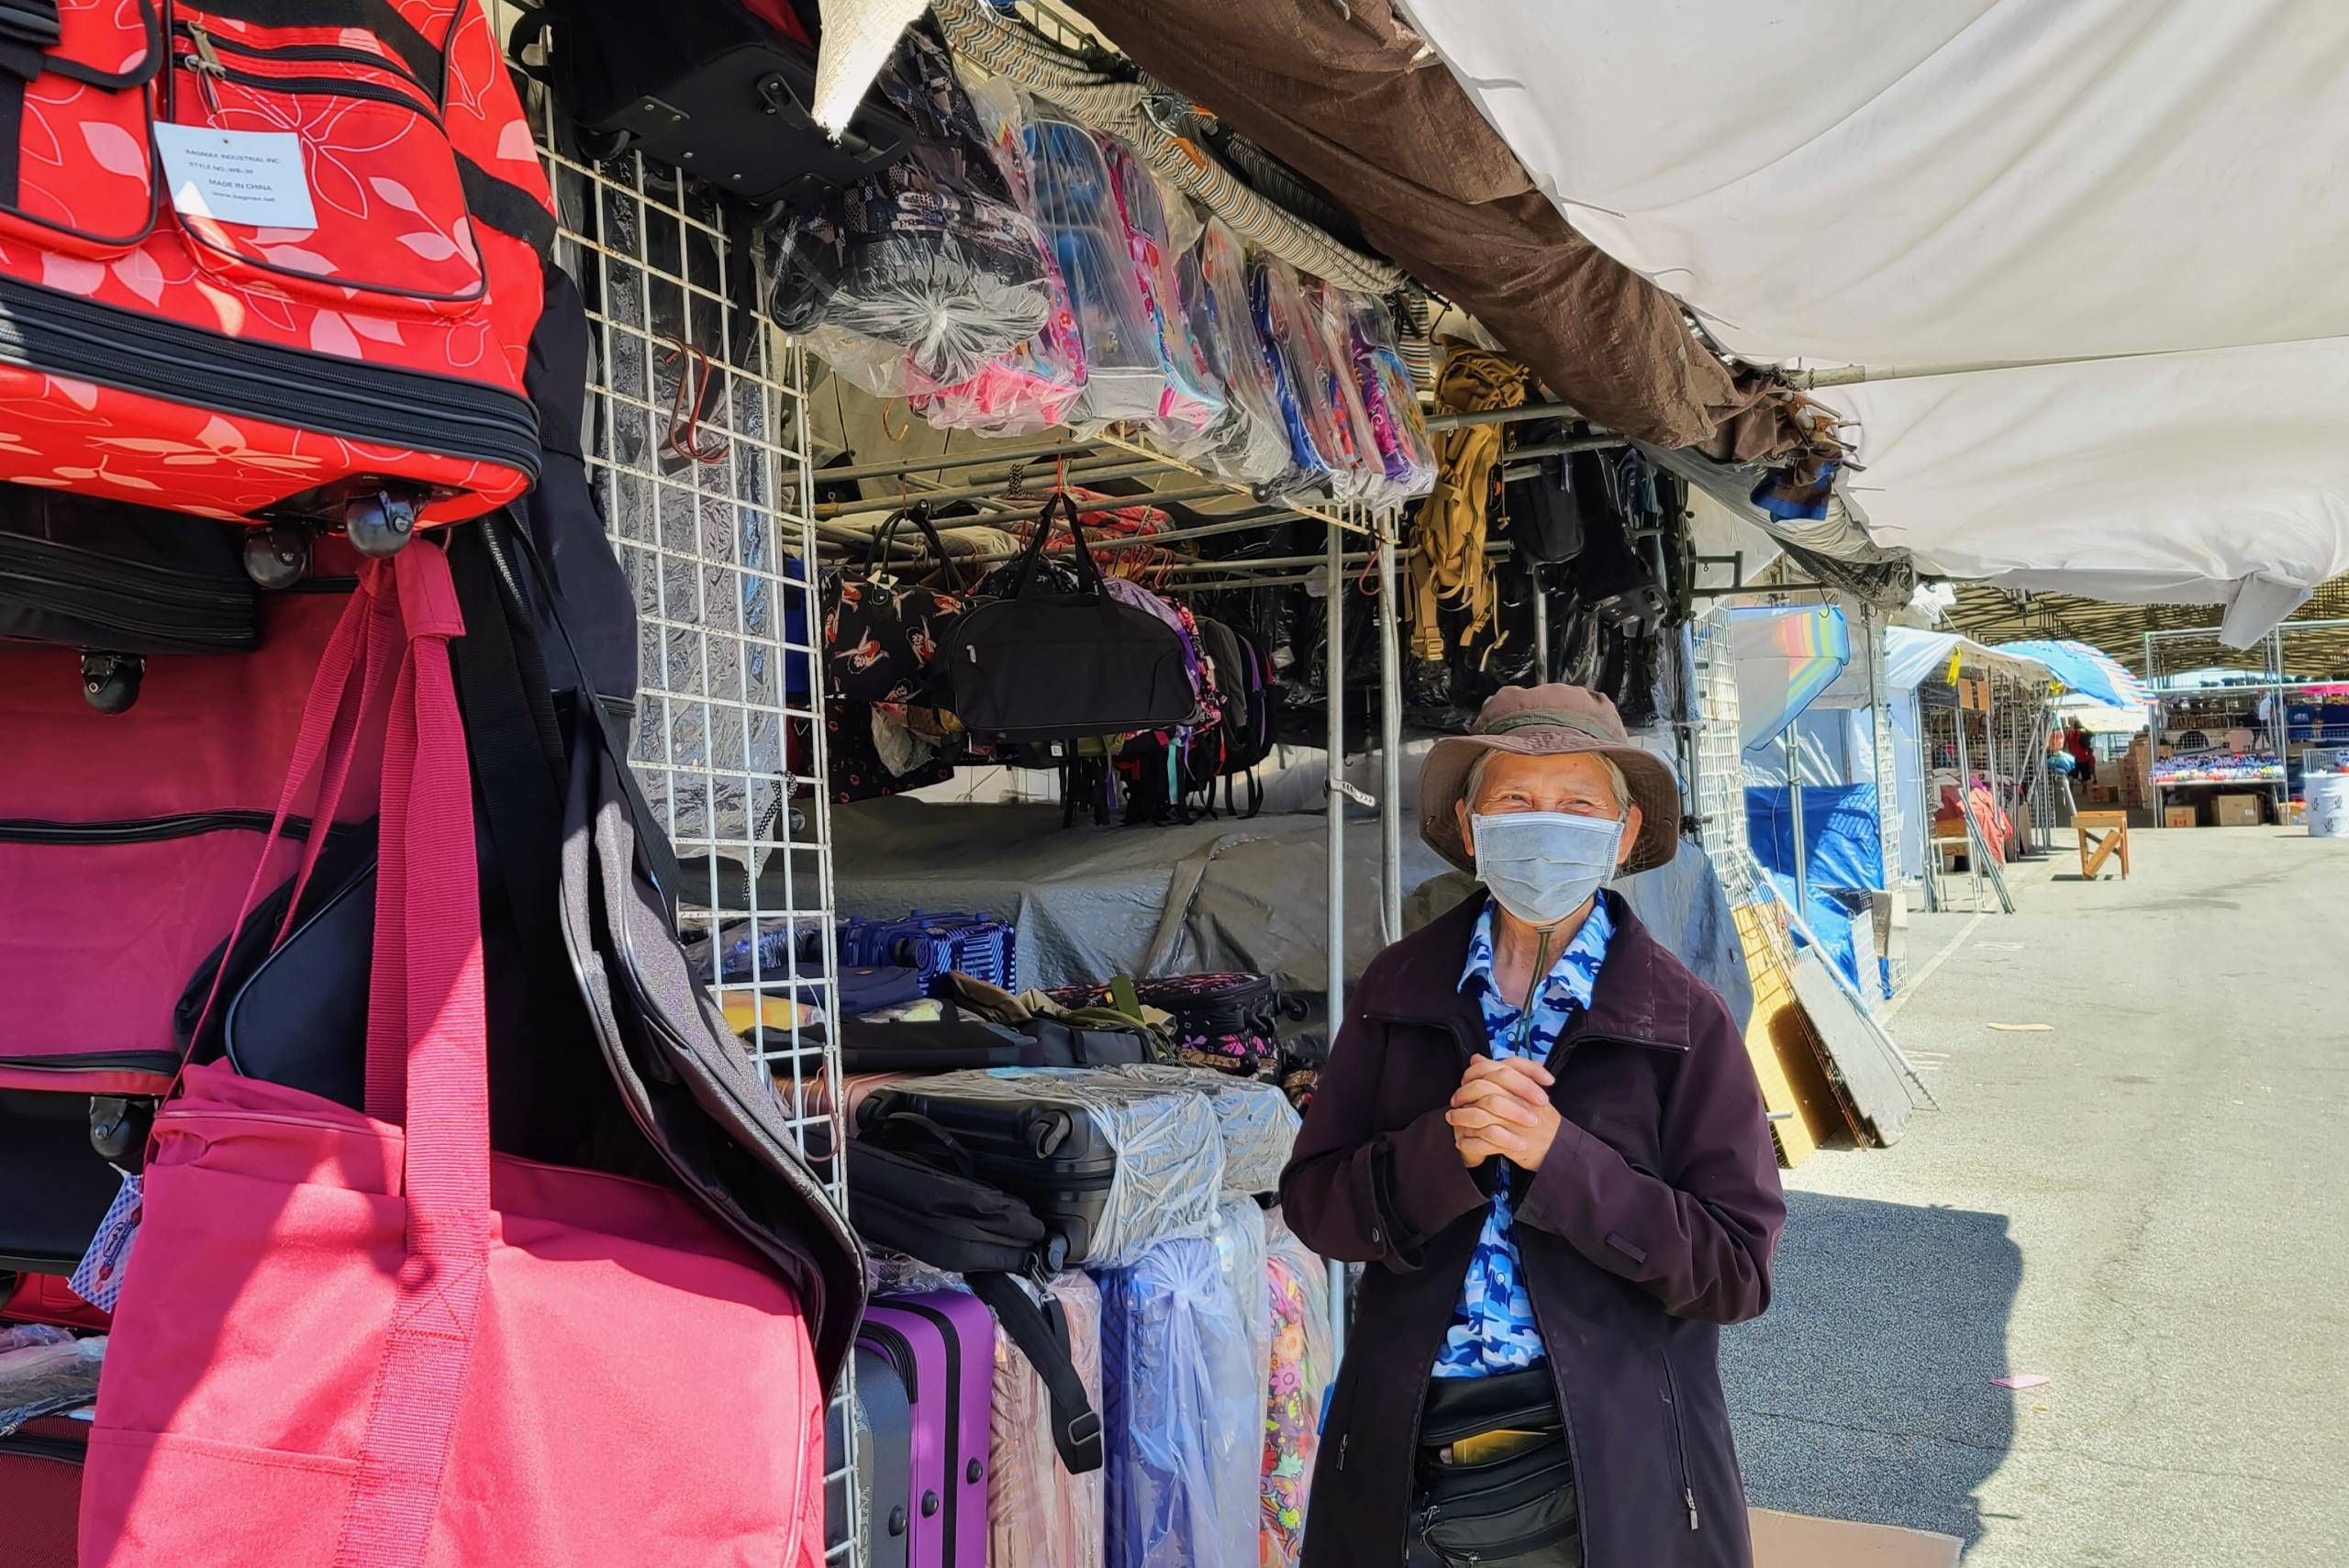 Chau Nguyen stands next to her stall covered in the luggage bags and backpacks she sells.